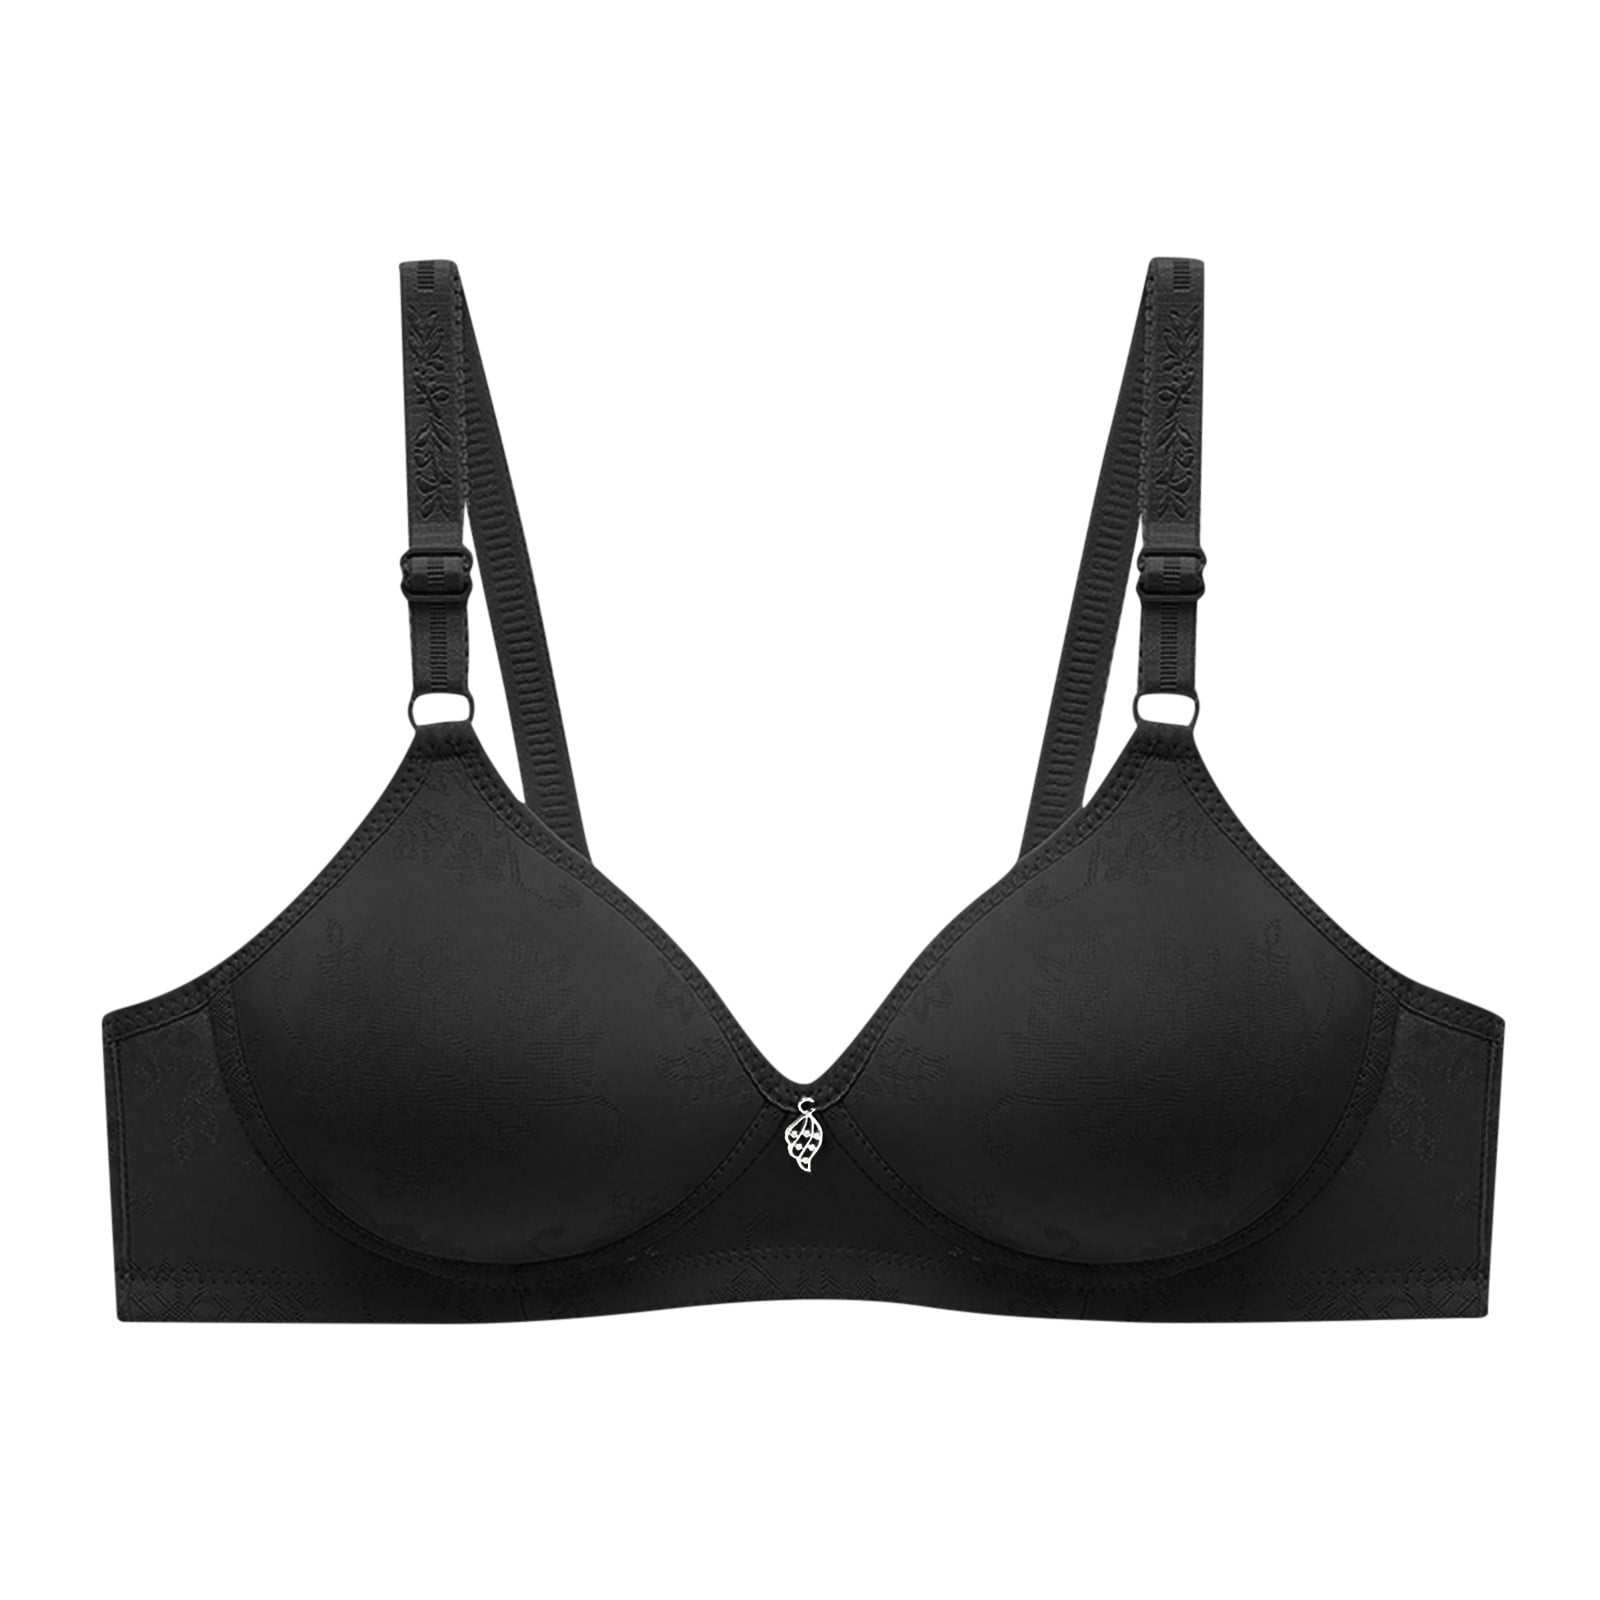 Mrat Clearance Front Closure Bras for Women Back Support Push up Strapless  Front Clasp Bras Plus Size Bandeau Unlined with Underwire Bras Plus Size  Half Strapless Push up Womens Sports Bras Black